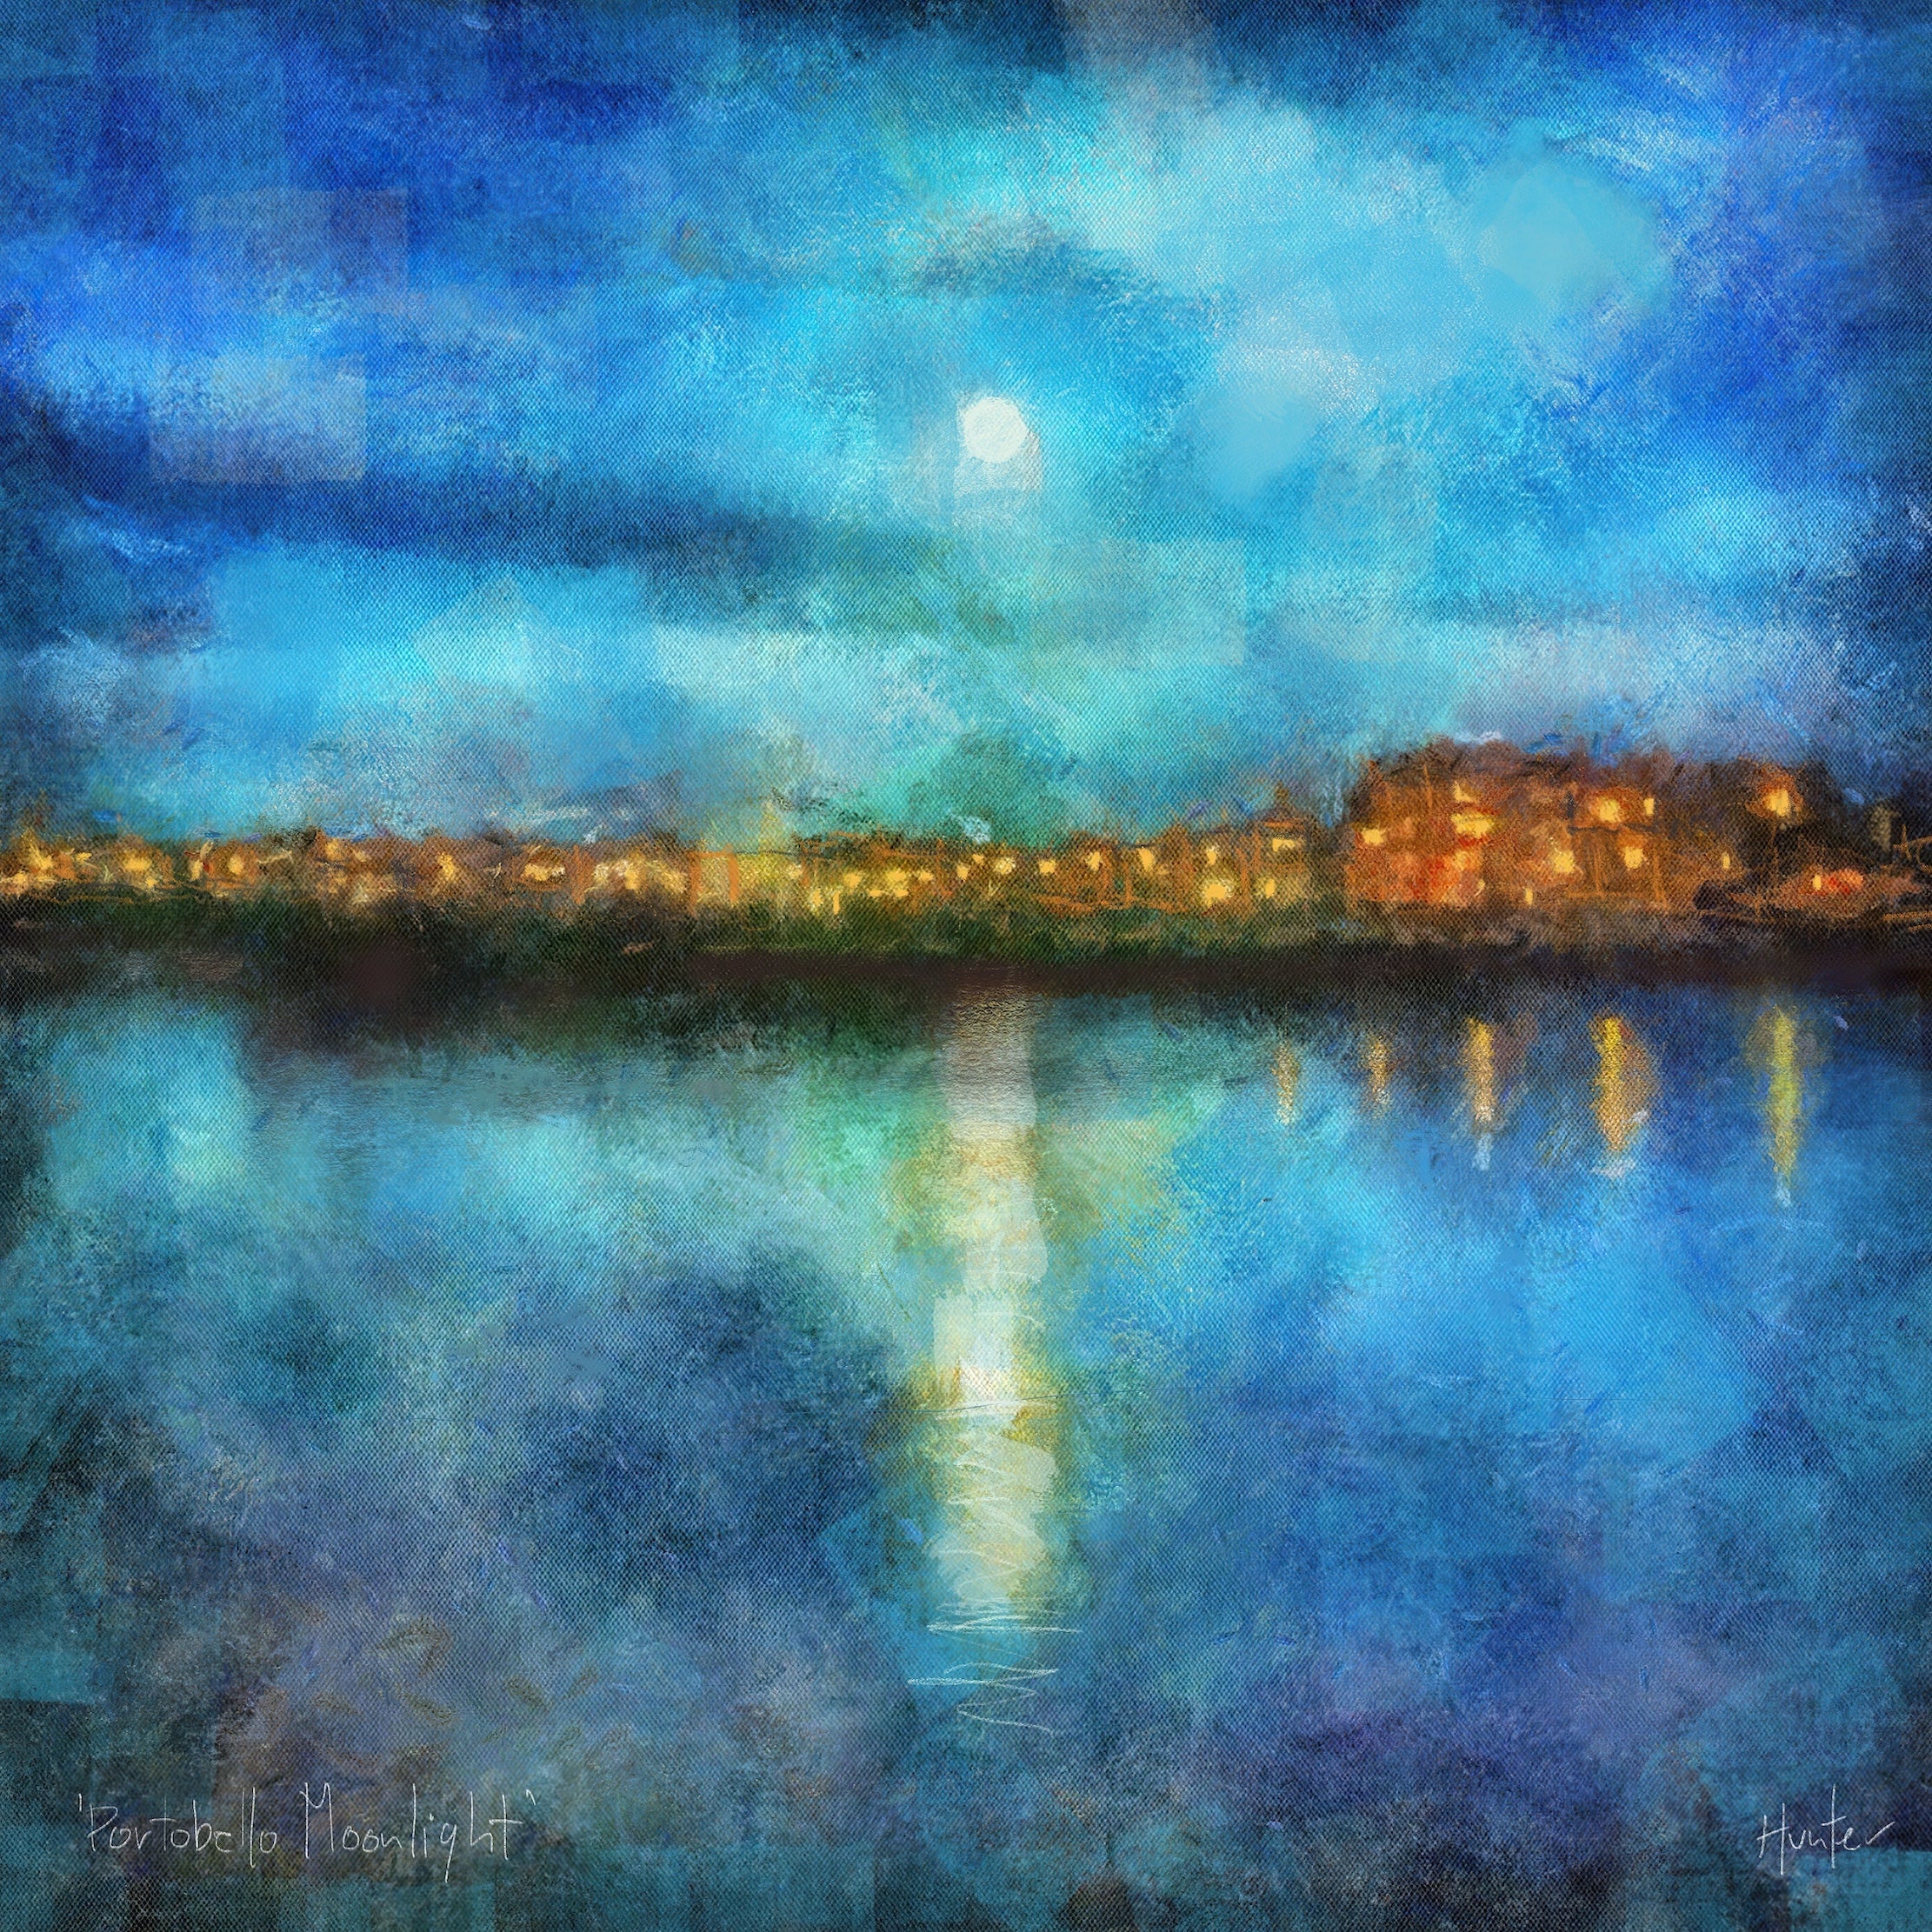 Portobello Moonlight | Scotland In Your Pocket Art Print-Scotland In Your Pocket Framed Prints-Edinburgh & Glasgow Art Gallery-Paintings, Prints, Homeware, Art Gifts From Scotland By Scottish Artist Kevin Hunter